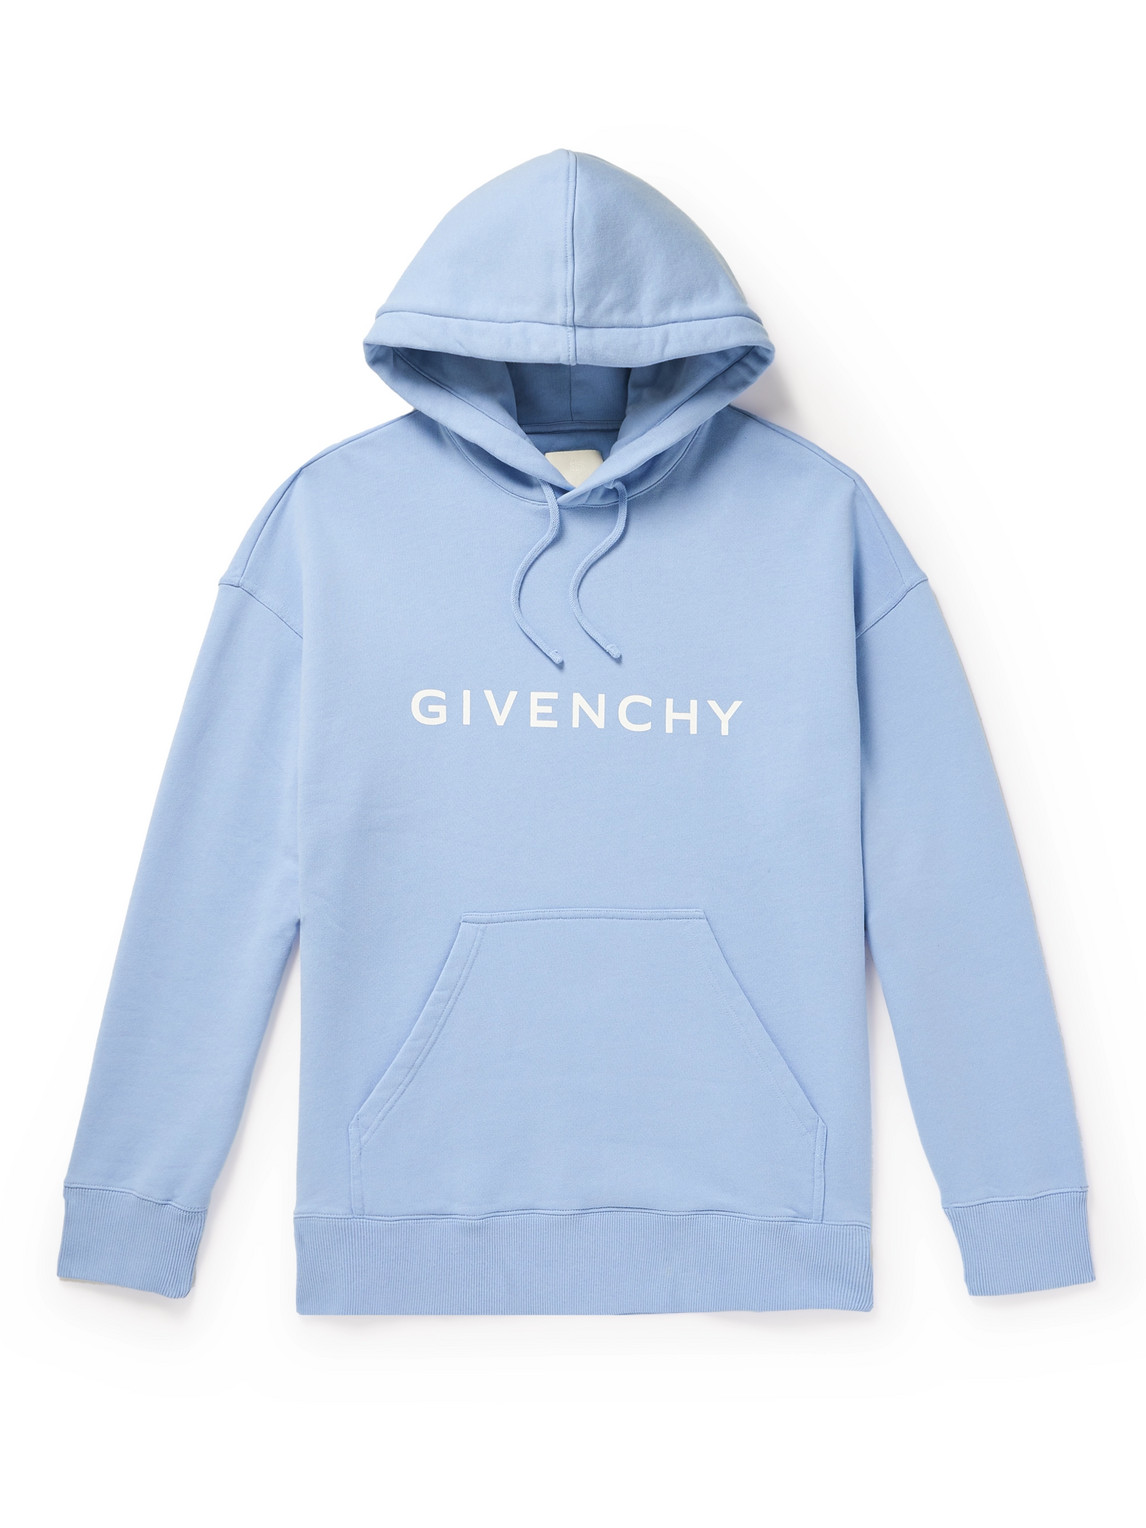 GIVENCHY ARCHETYPE LOGO-PRINT COTTON-JERSEY HOODIE